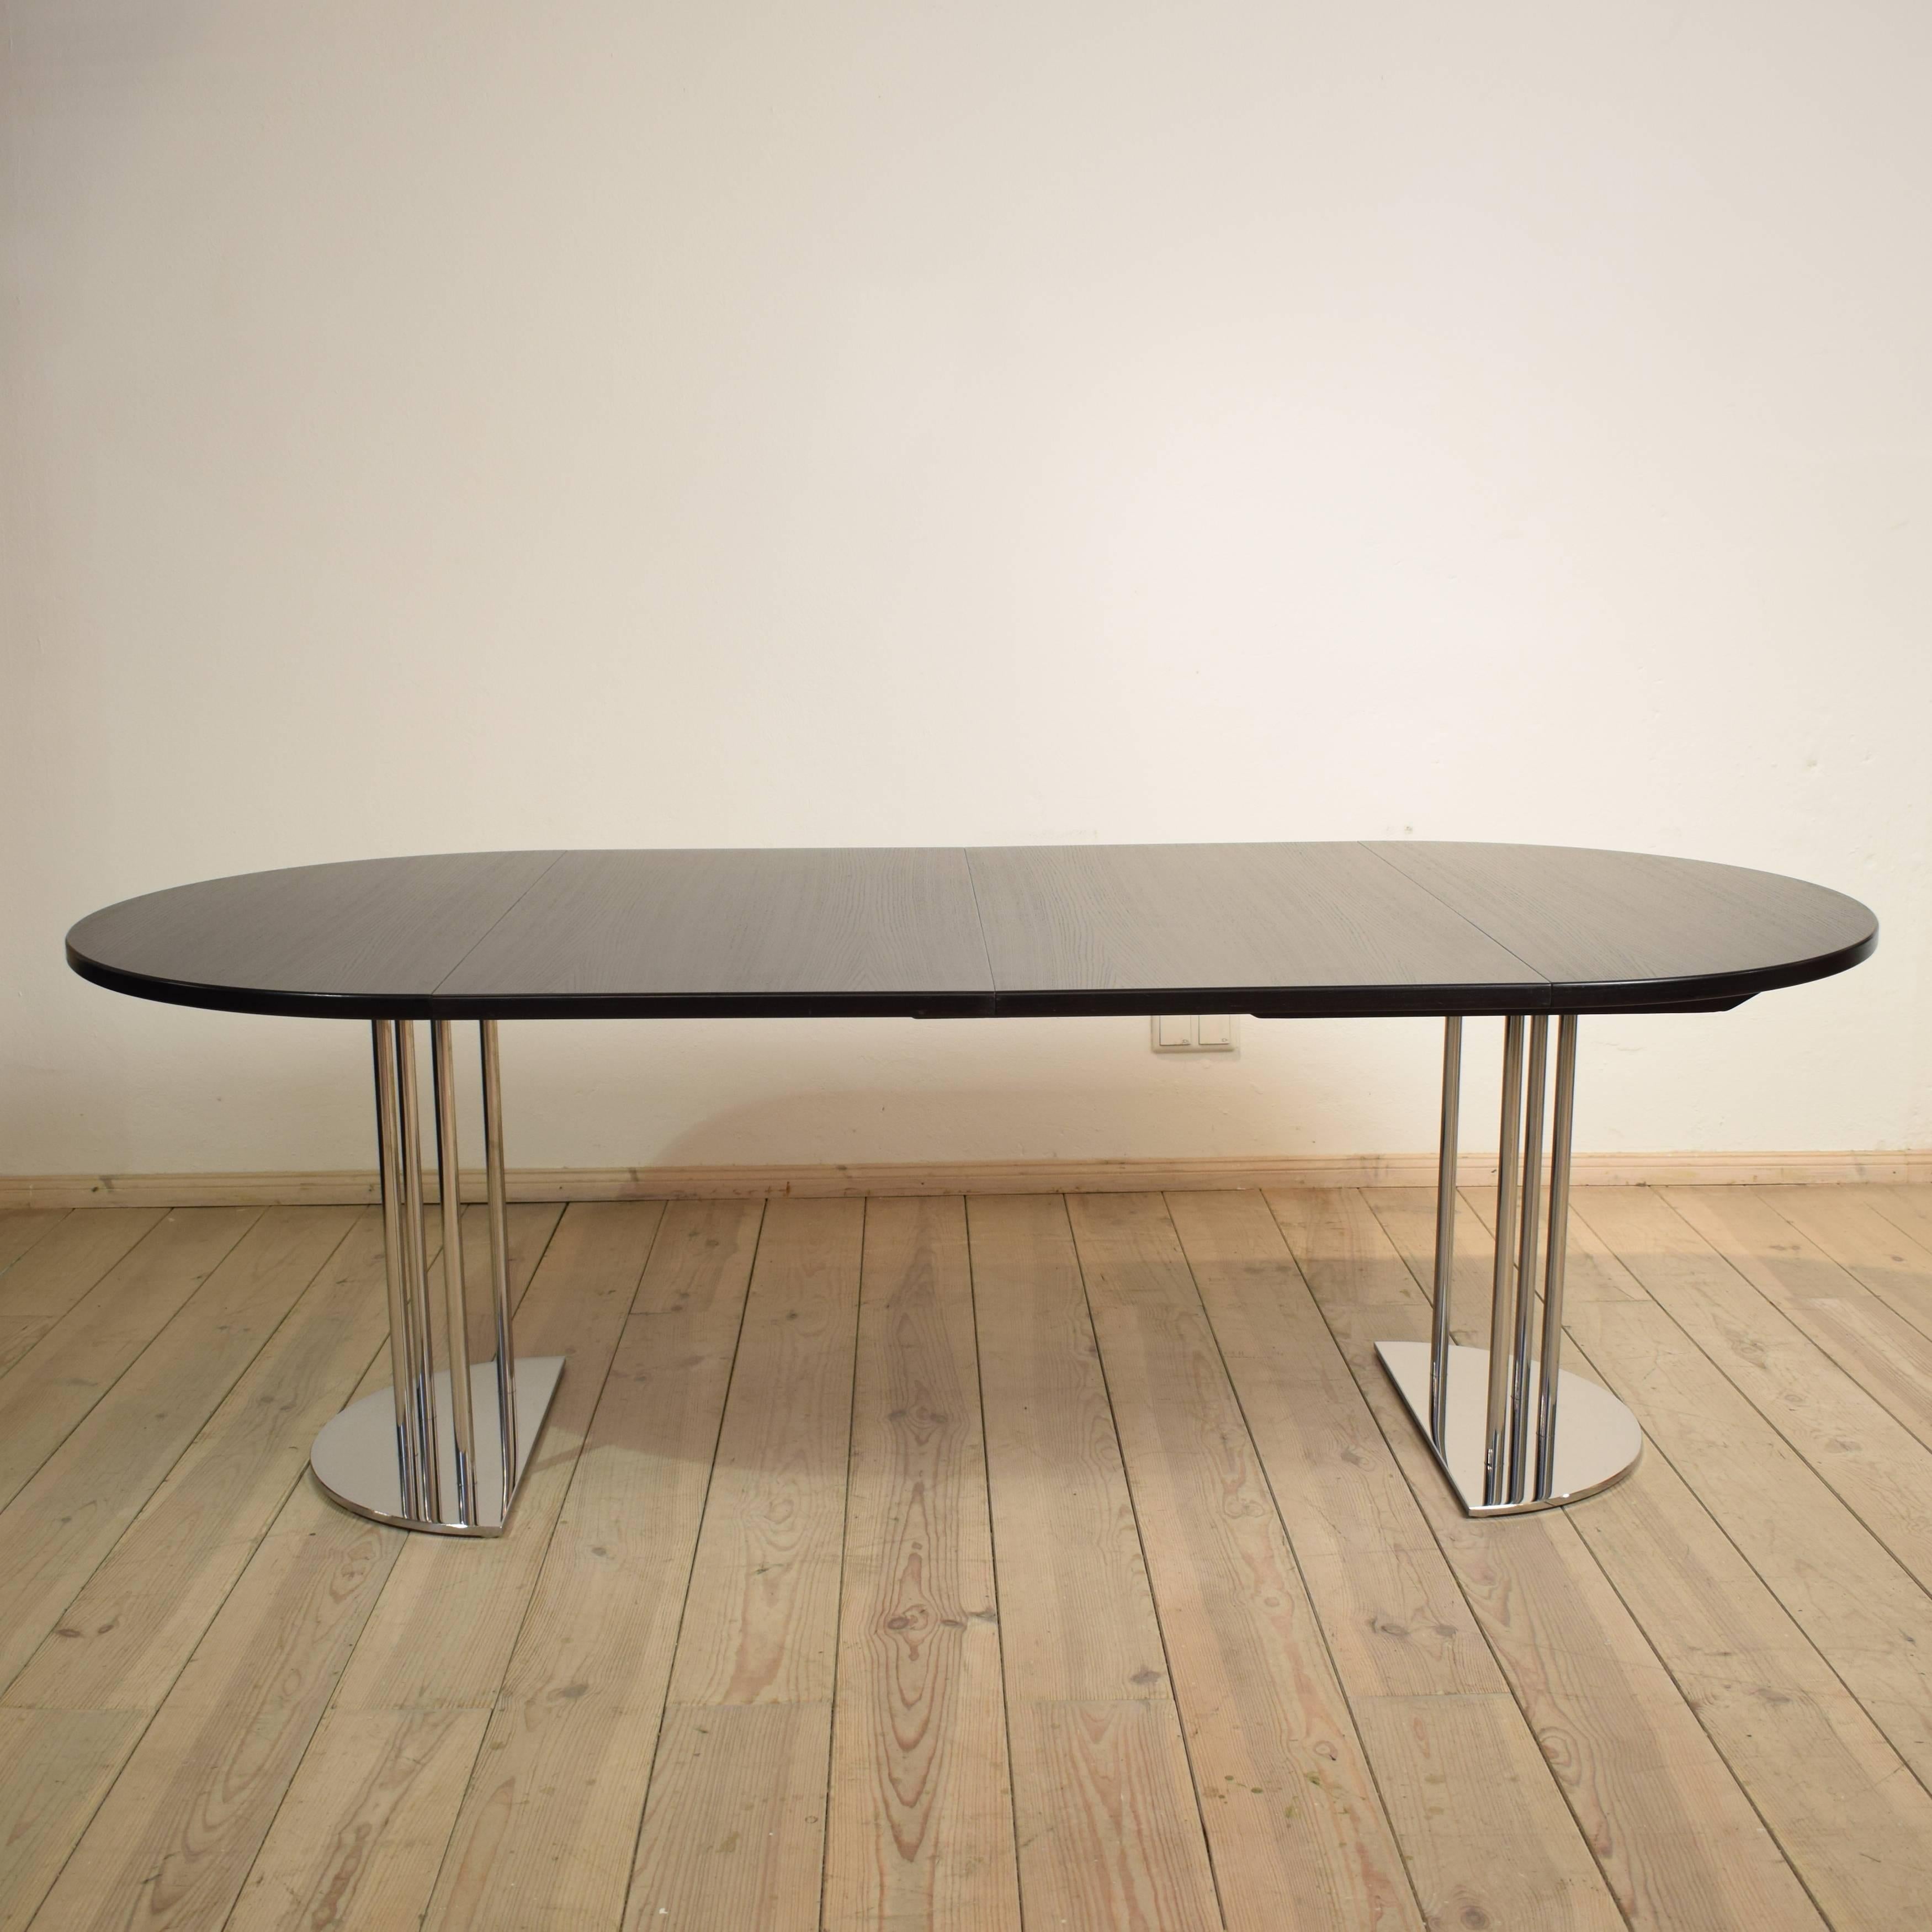 Late 20th Century Extendable Round Bauhaus Dining Table by Thonet S1047